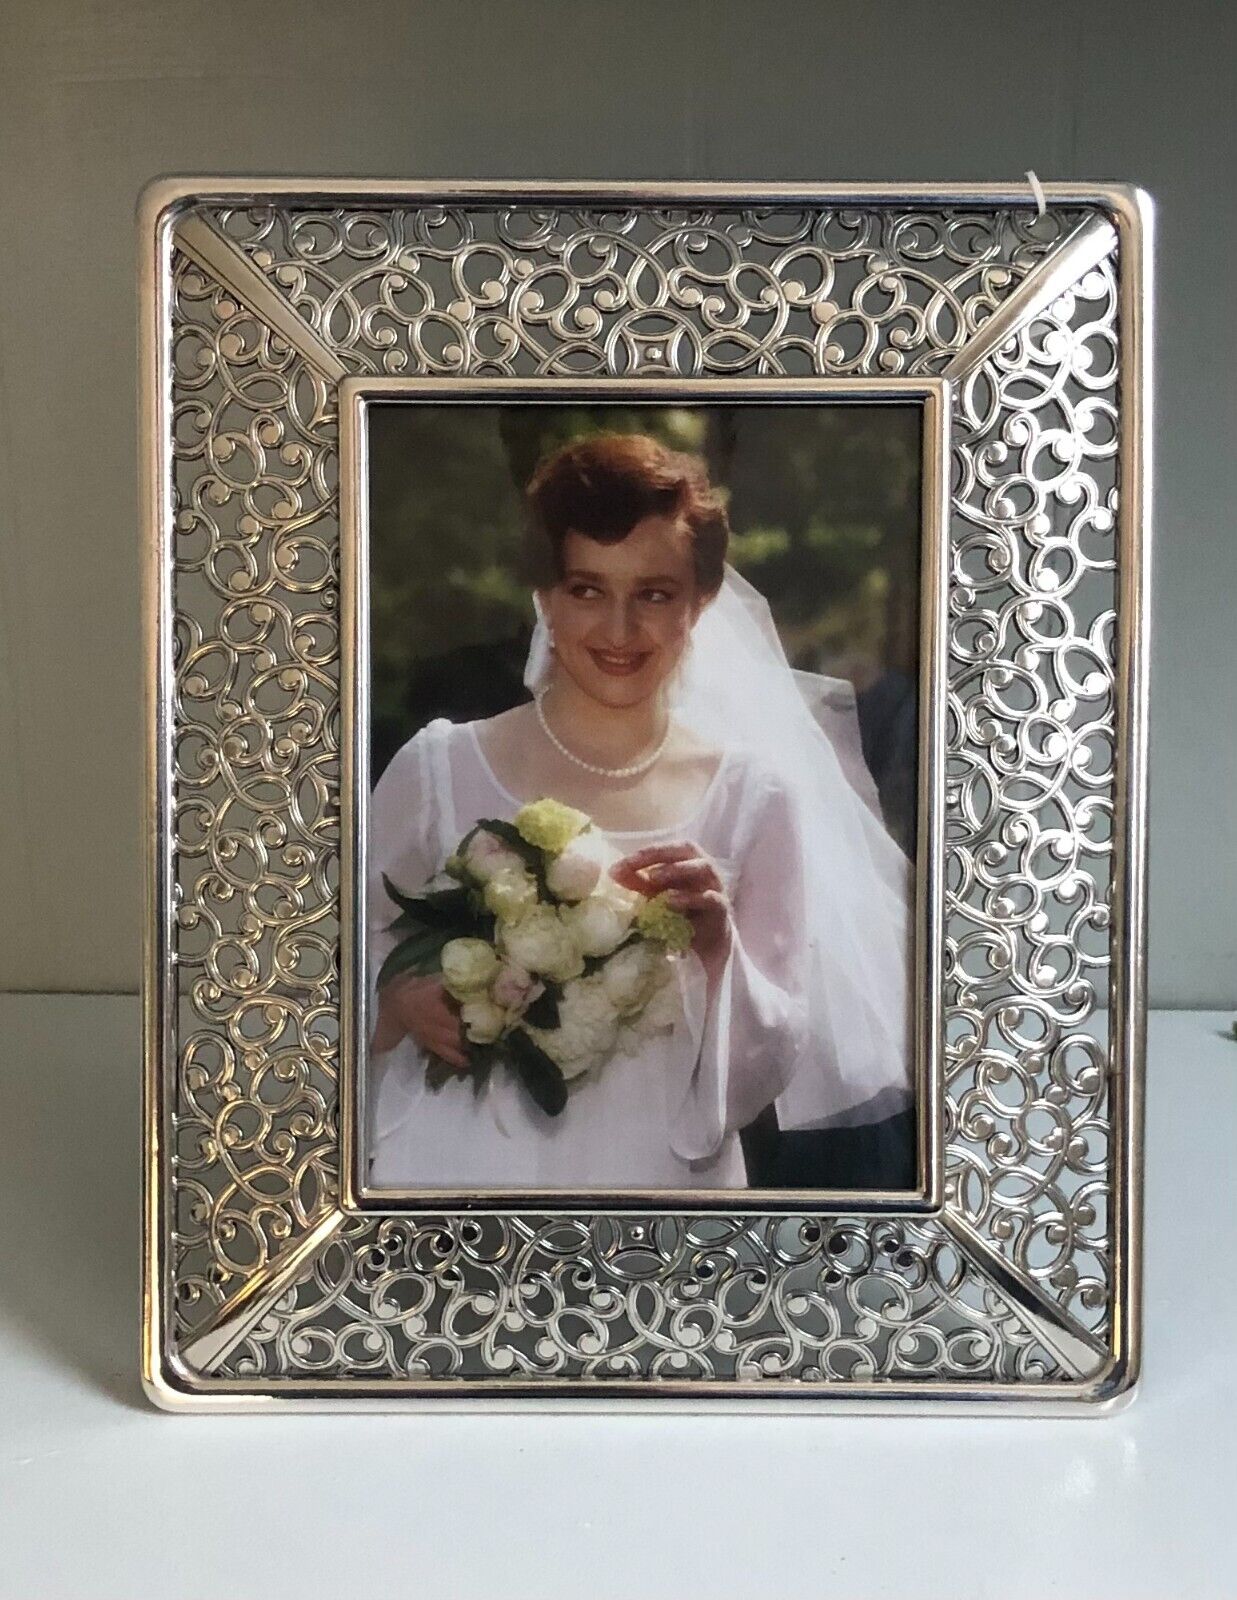 Brighton Picture Frame 9x11-in For 5x7-in Photo New Retails for $85